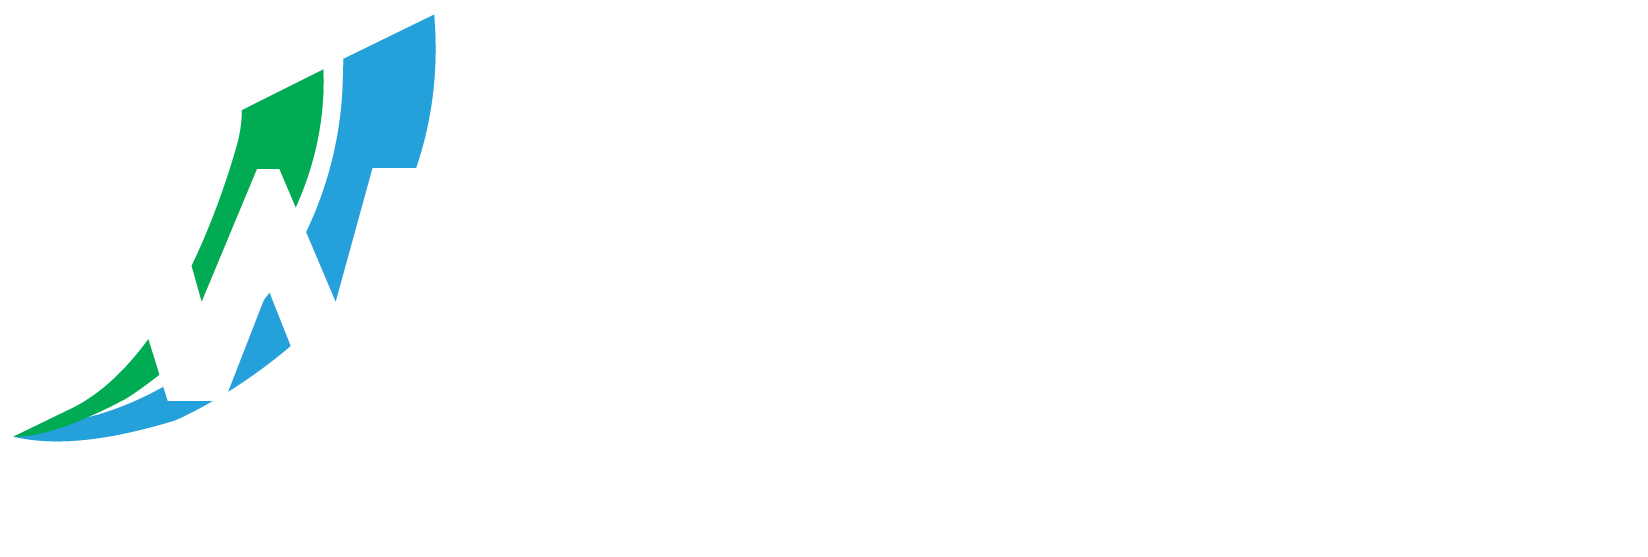 Winning the Business by APMP